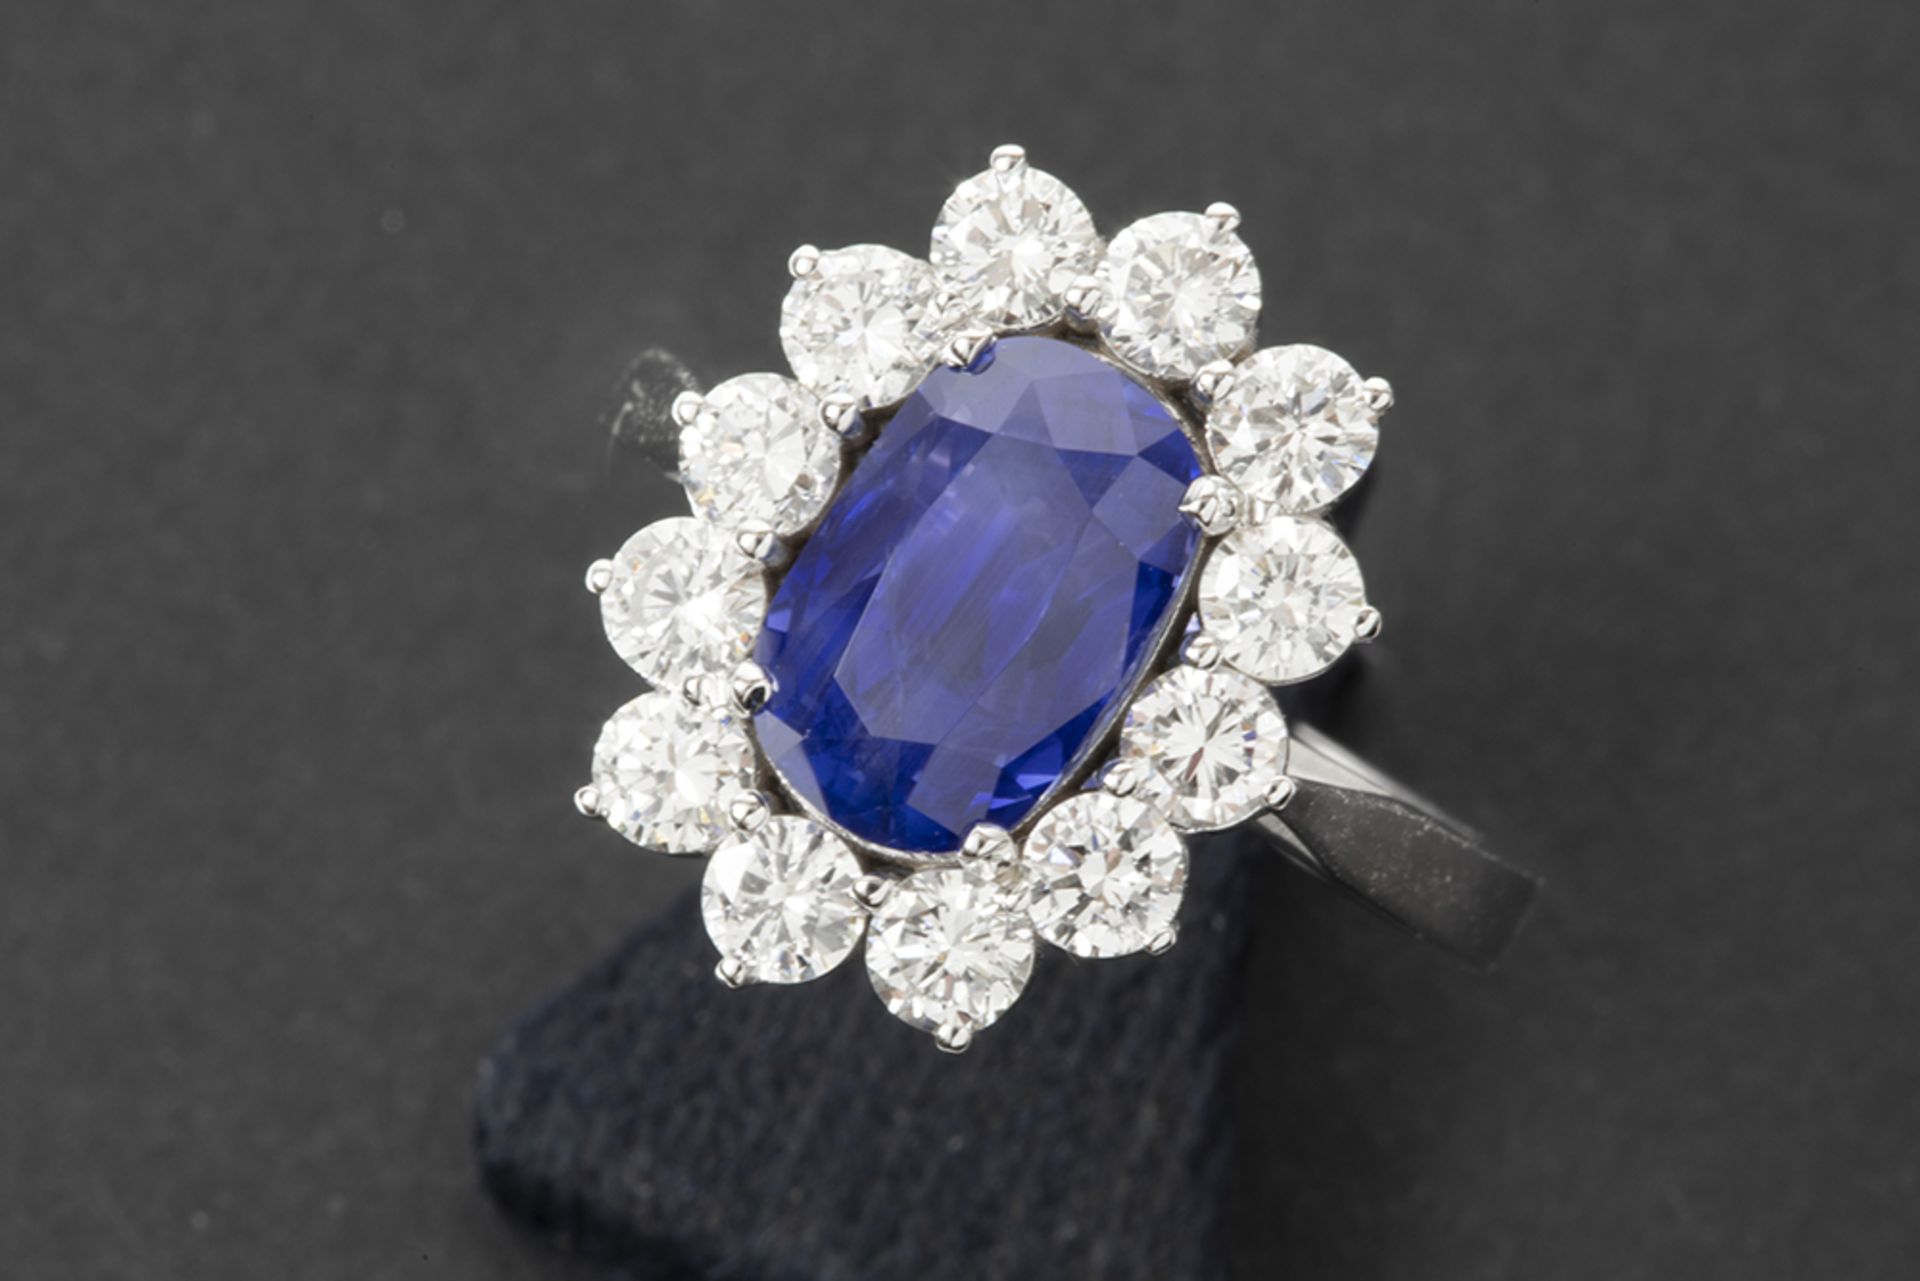 ring in white gold (18 carat) with an oval 4,20 carat non-heated Sri Lankan sapphire surrounded by